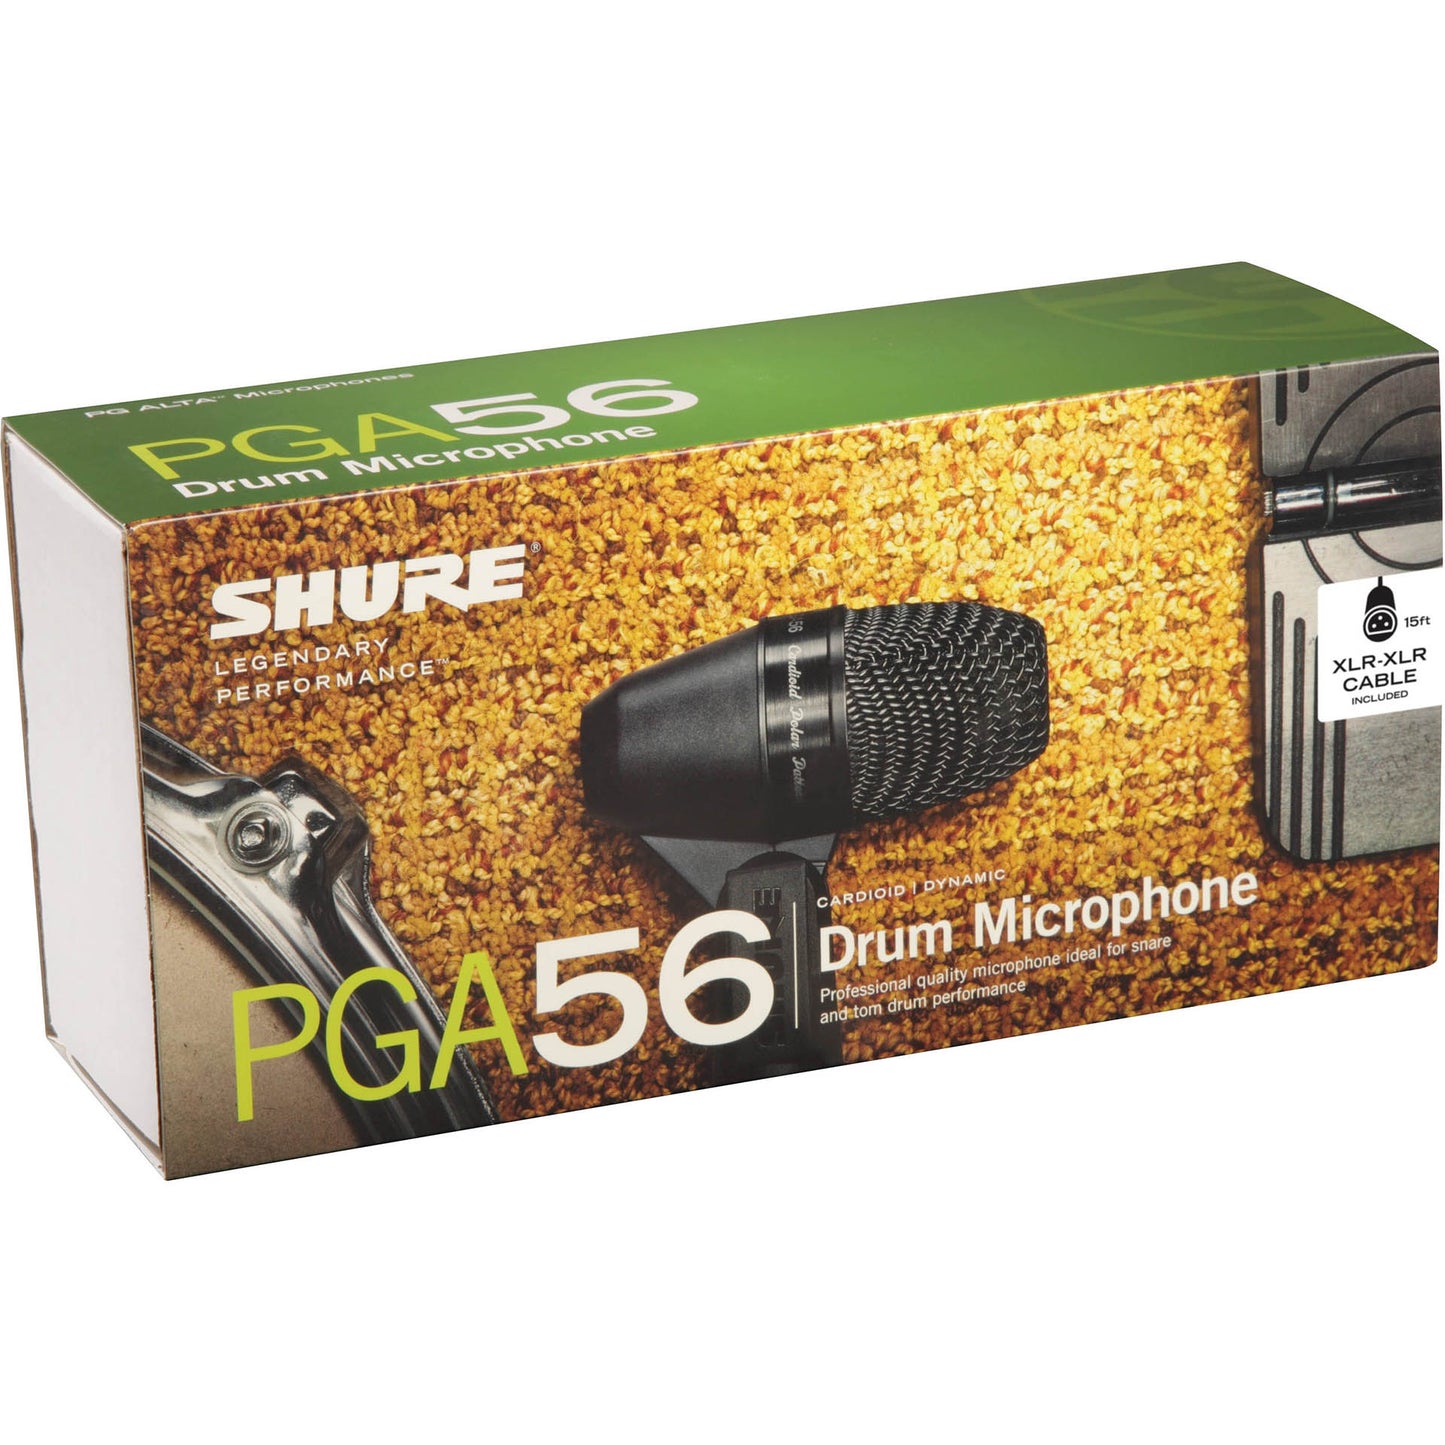 Shure PGA56-XLR Cardioid Swivel-Mount Dynamic Snare/Tom Microphone with AP56DM Drum Mount and 15ft. XLR-XLR Cable